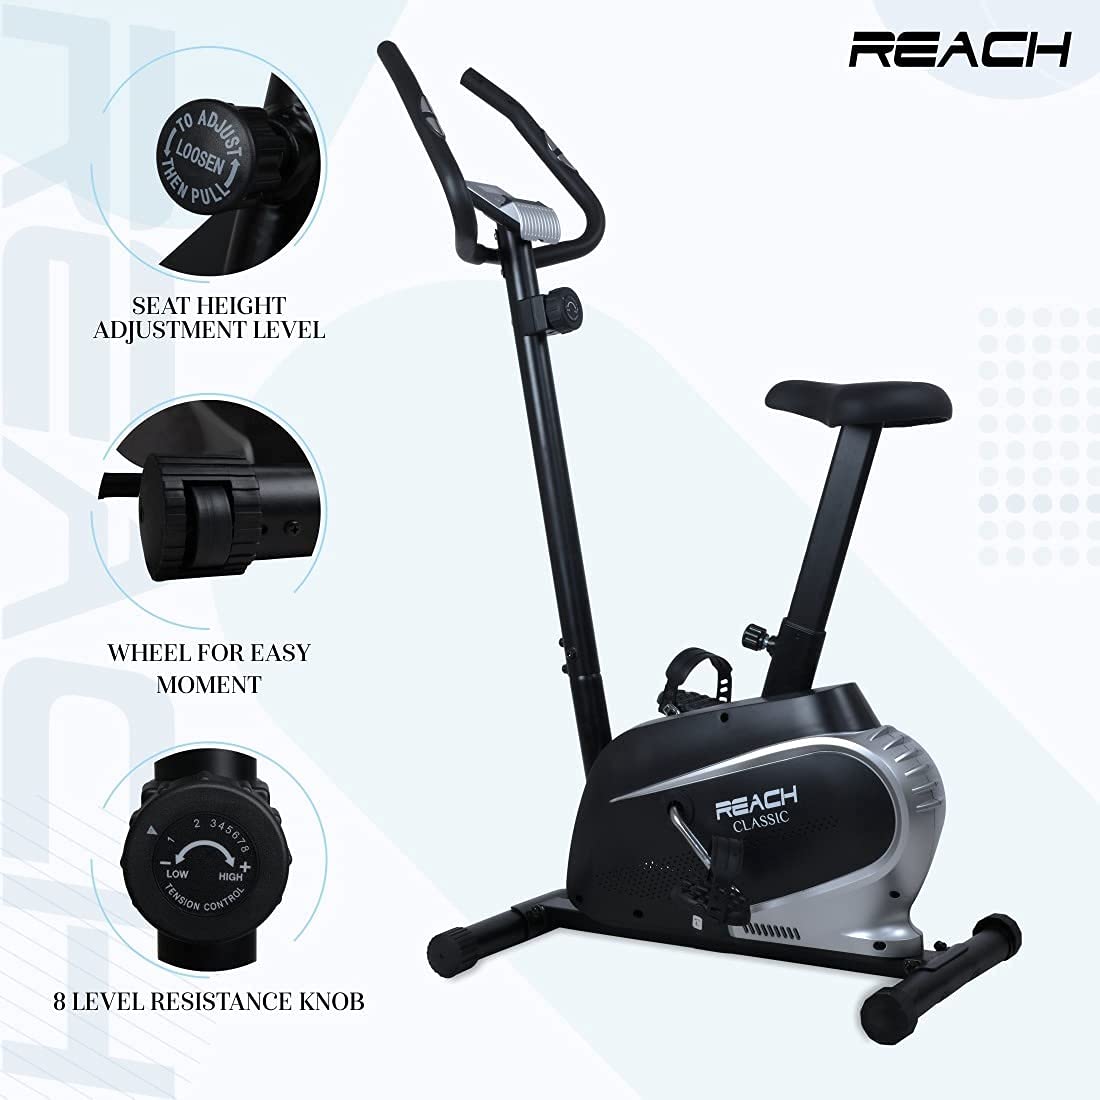 Reach B-201 Smart Exercise Cycle with 4kg Flywheel | Indoor Upright Stationary Bike | 8 Levels of Adjustable Magnetic Resistance with Cushioned Seat | LCD Screen | Max User Weight 110kg